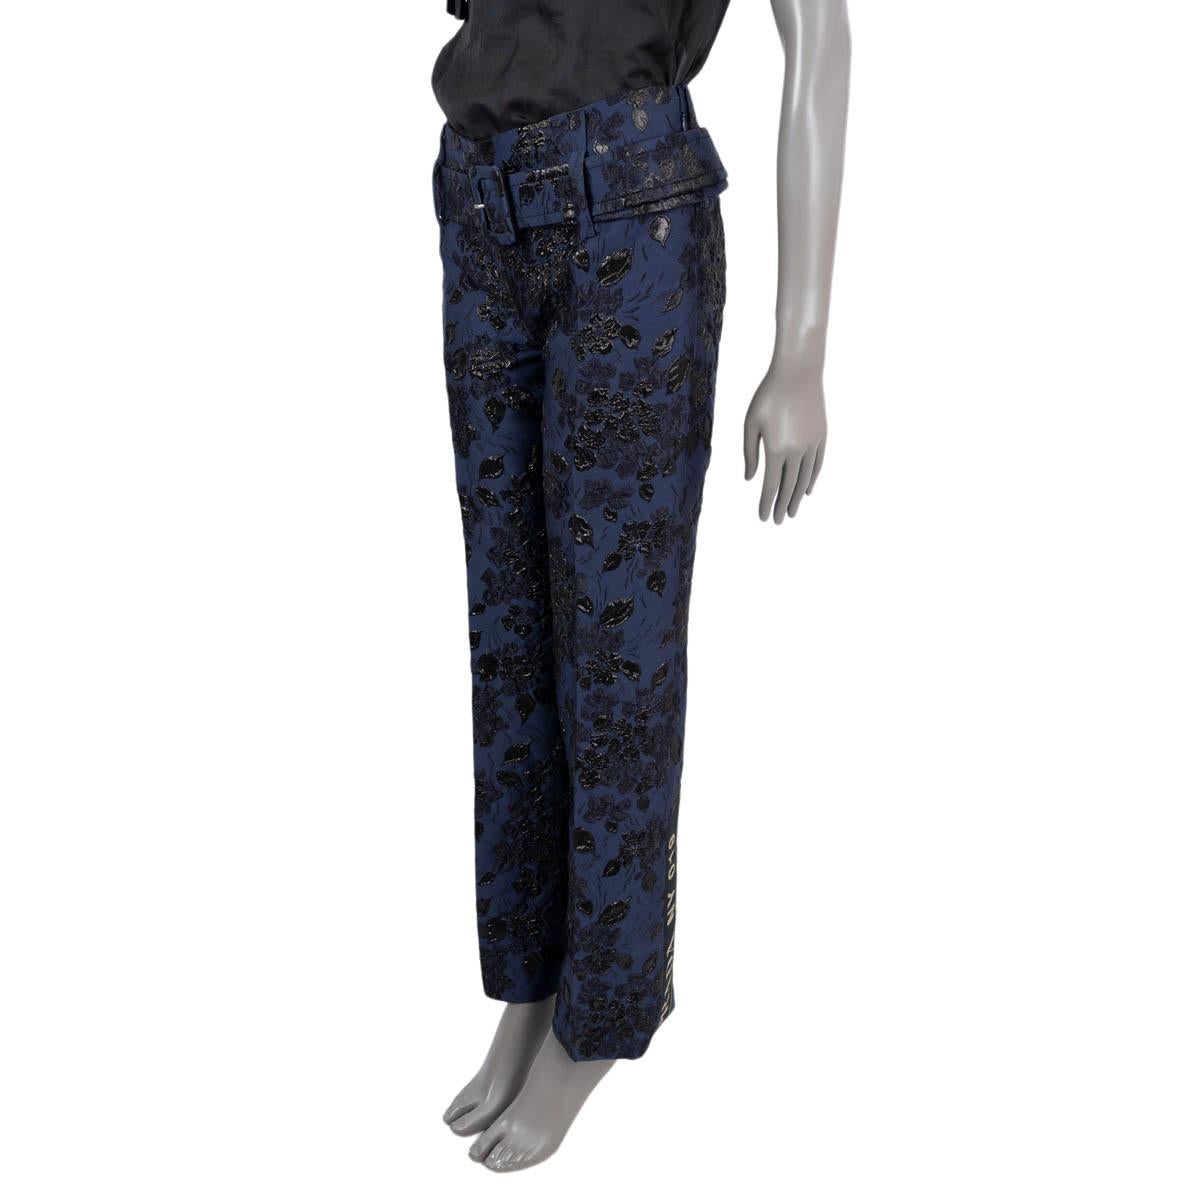 100% authentic Prada floral-cloqué wide-leg pants in navy blue and metallic black polyester (59%), acetate  (25%), silk (10%) and polyamide (6%). Features belted and brocade, on the side Prada lettering. Closes with a concealed zipper. Have been